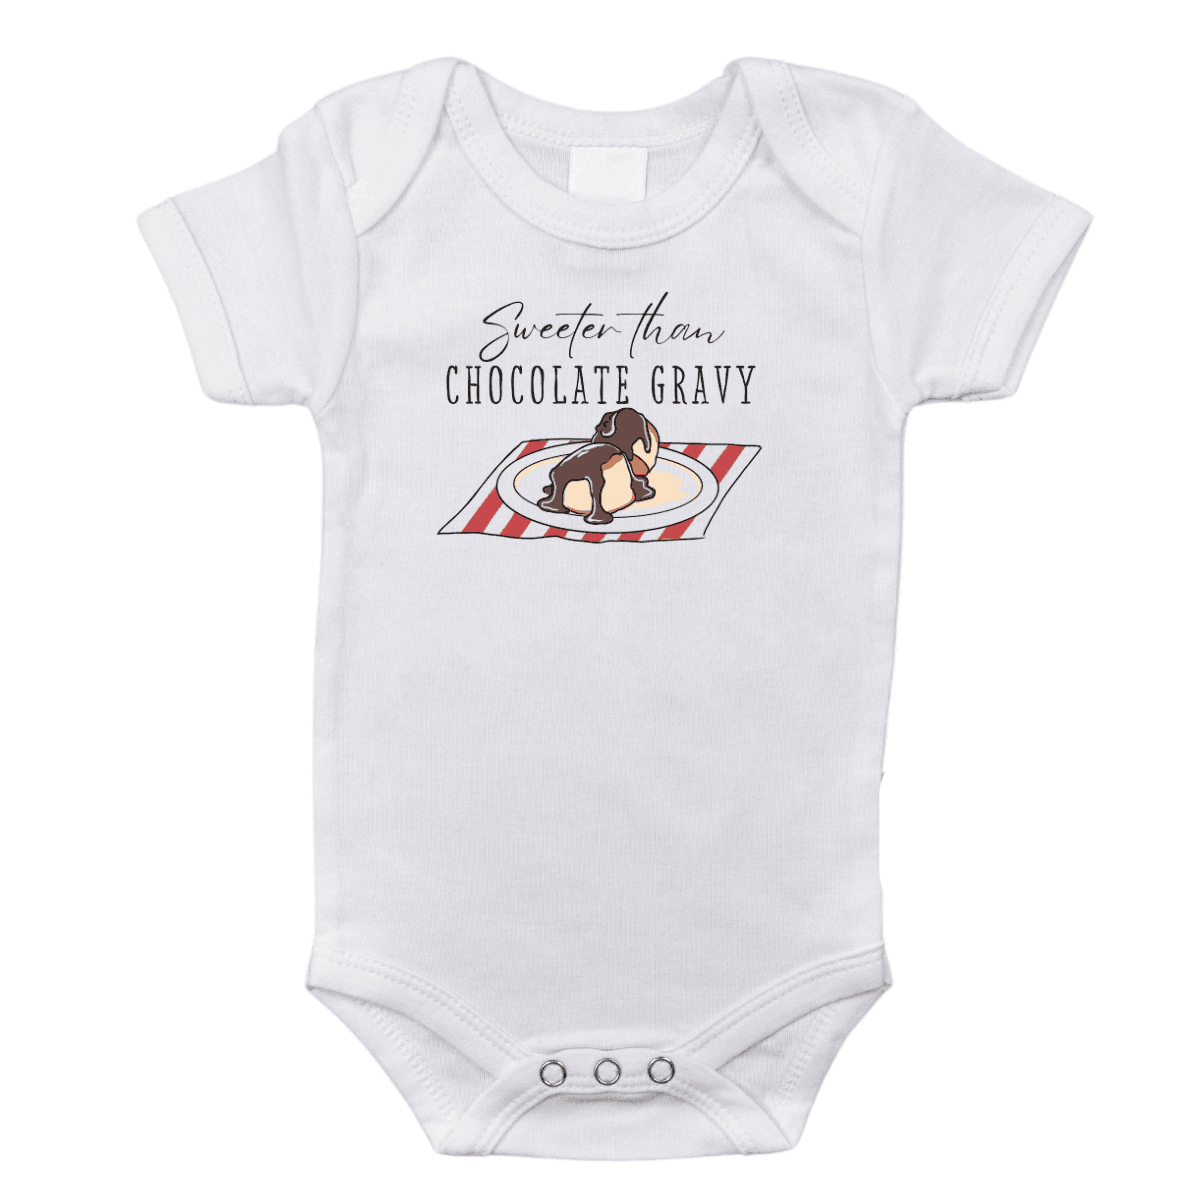 White baby onesie with "Arkansas Chocolate Gravy" text and a cute chocolate gravy illustration on the front.